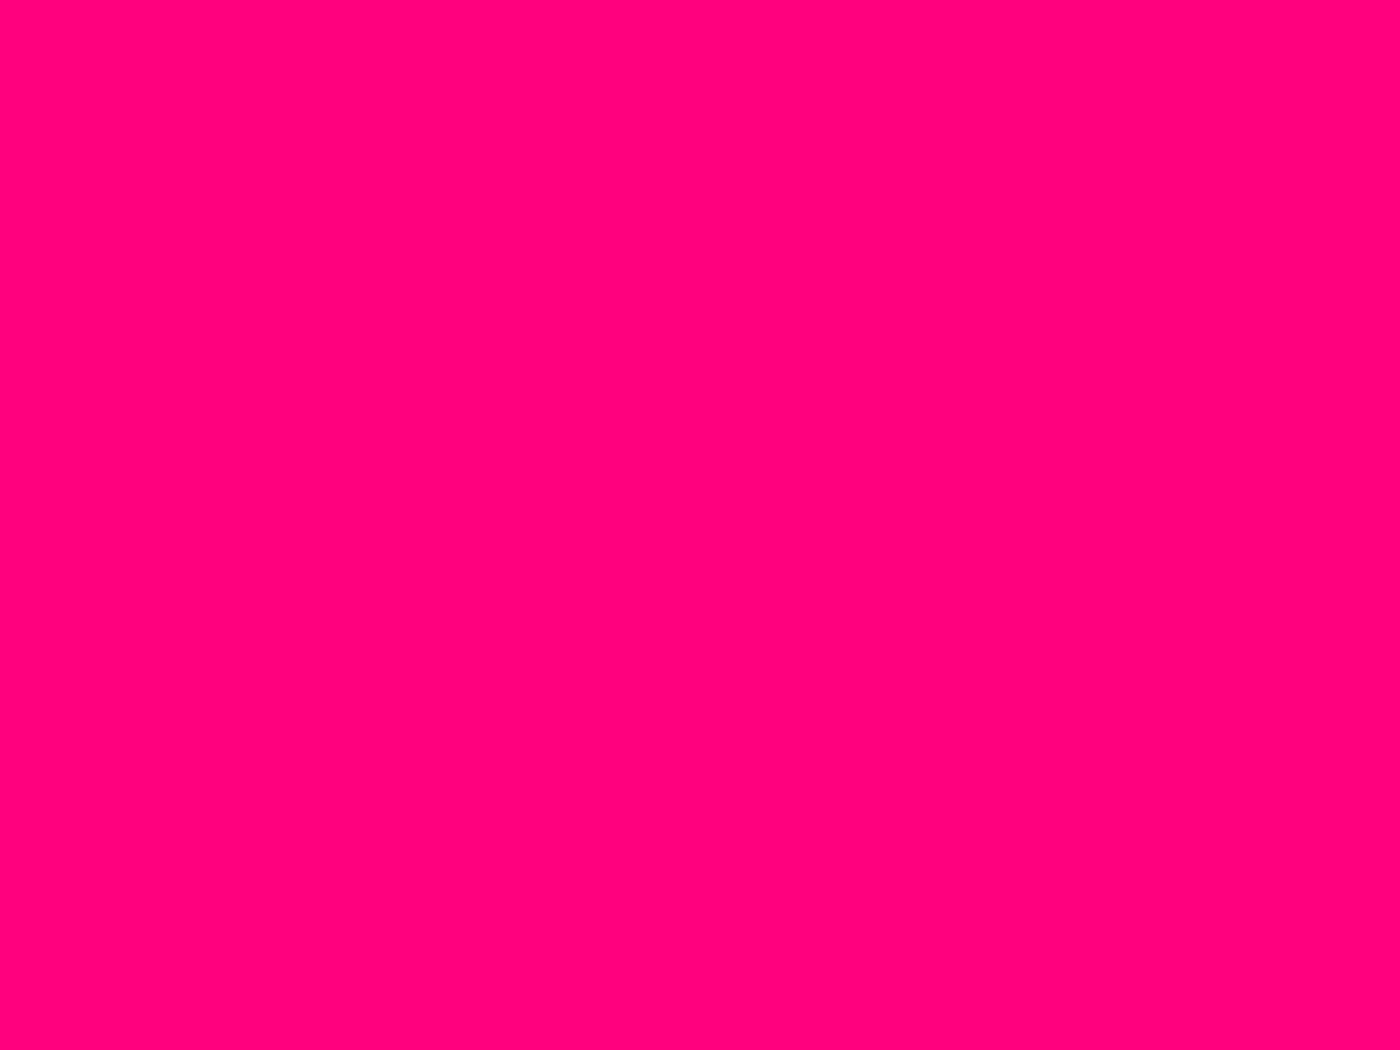 Solid Bright Pink Background Image Amp Pictures Becuo